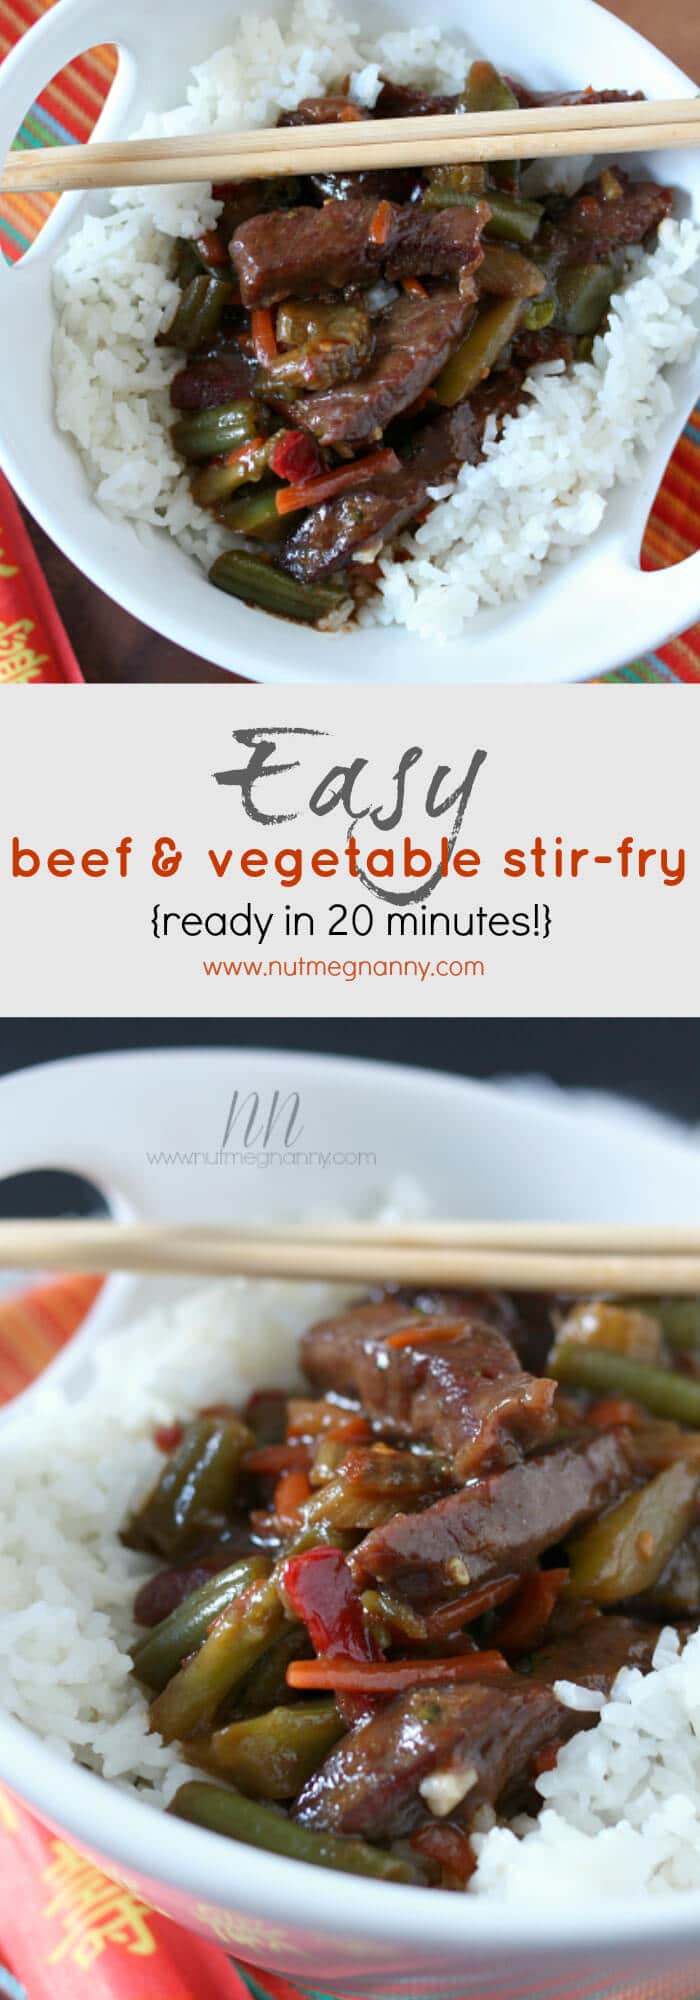 This easy beef and vegetable stir-fry is packed full of nutritious vegetables, tender beef tips and lots of delicious flavor. Plus it's ready in 20 minutes!